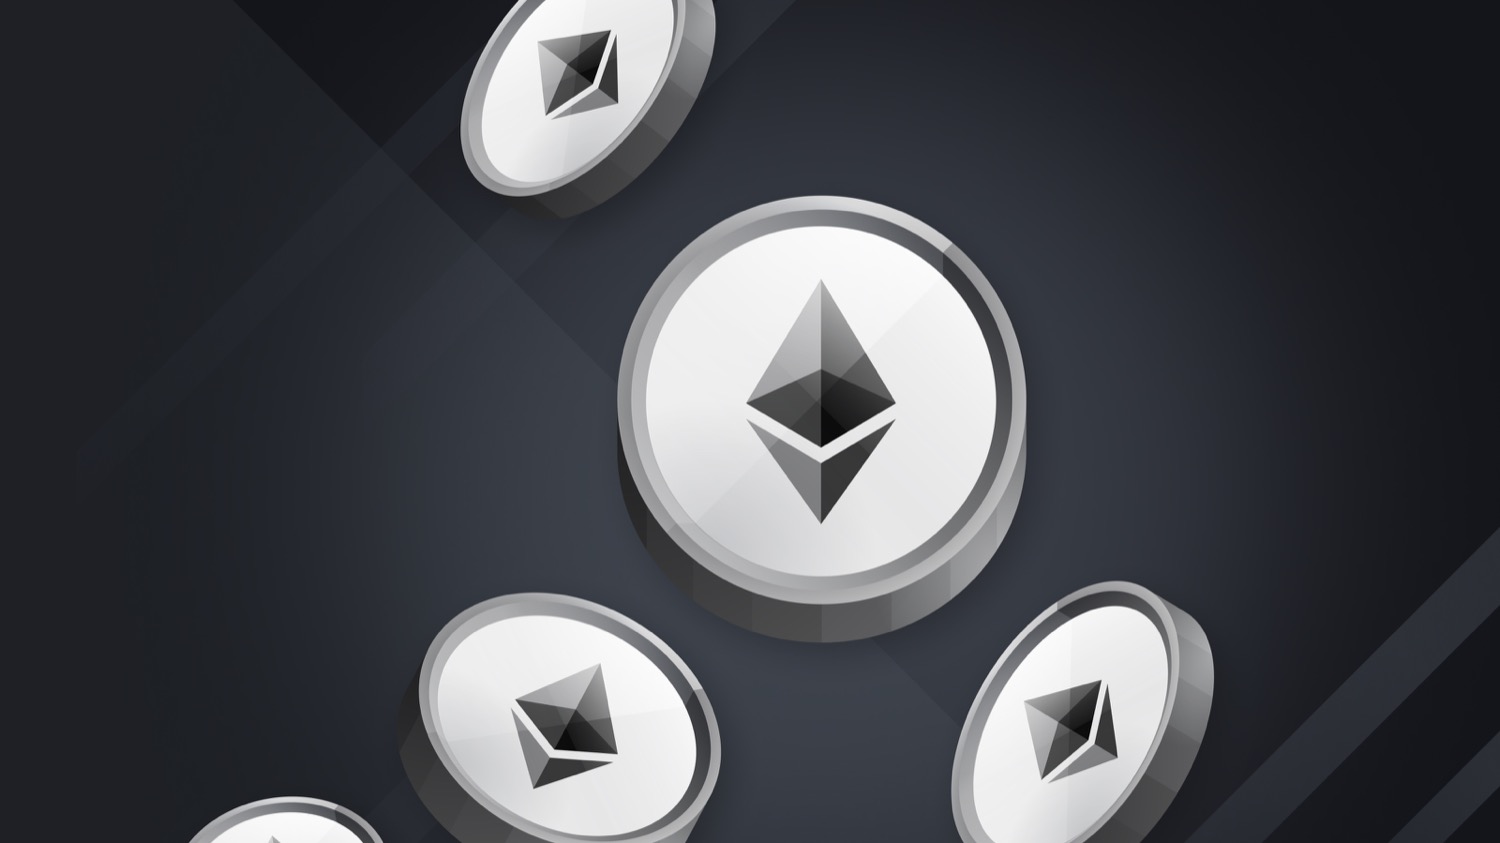 All About Ethereum (ETH)